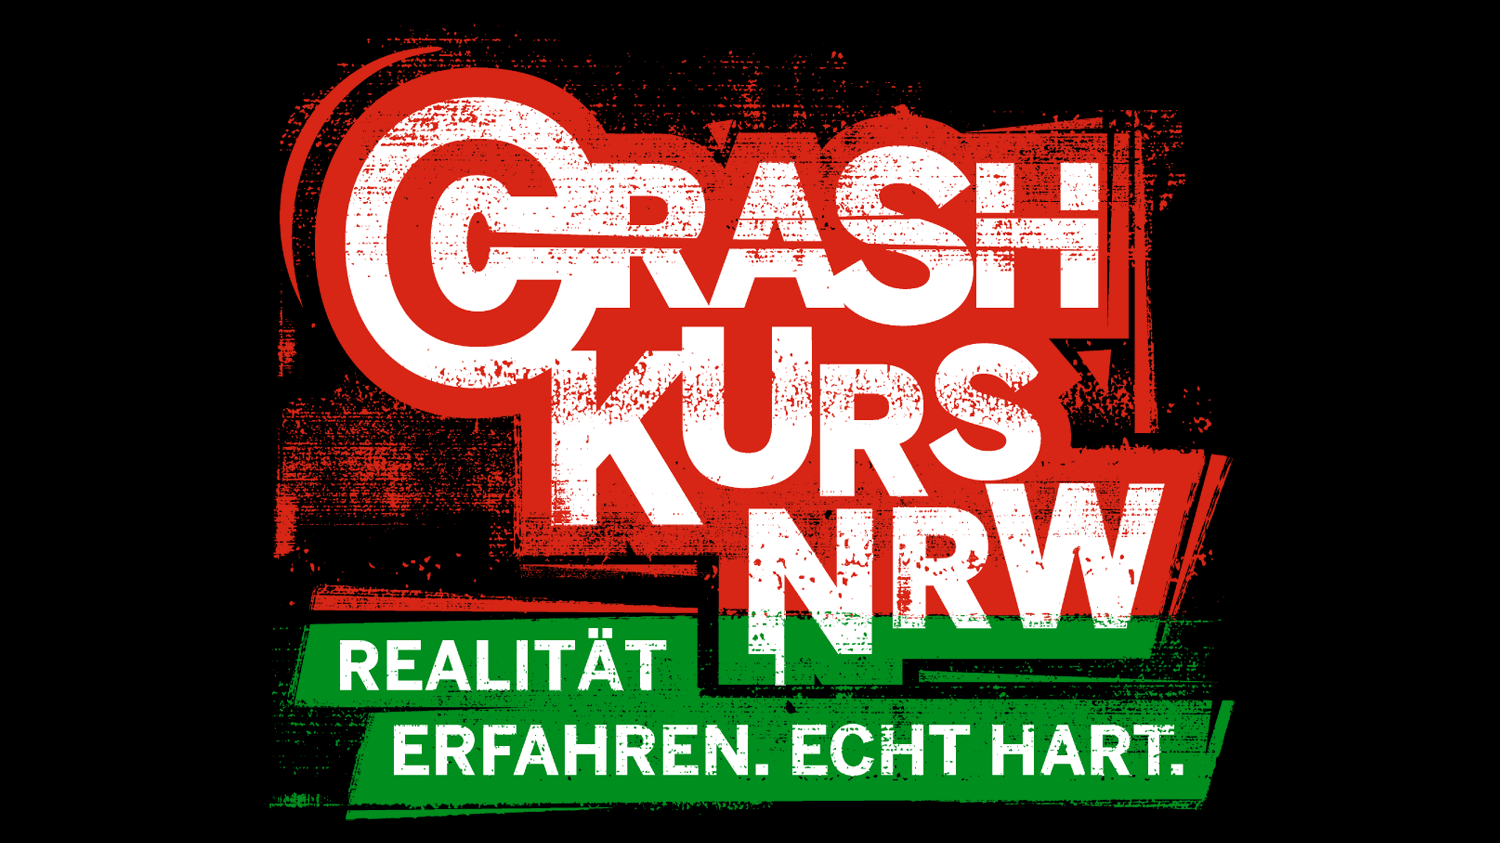 Logo of the NRW police state campaign Crash Course